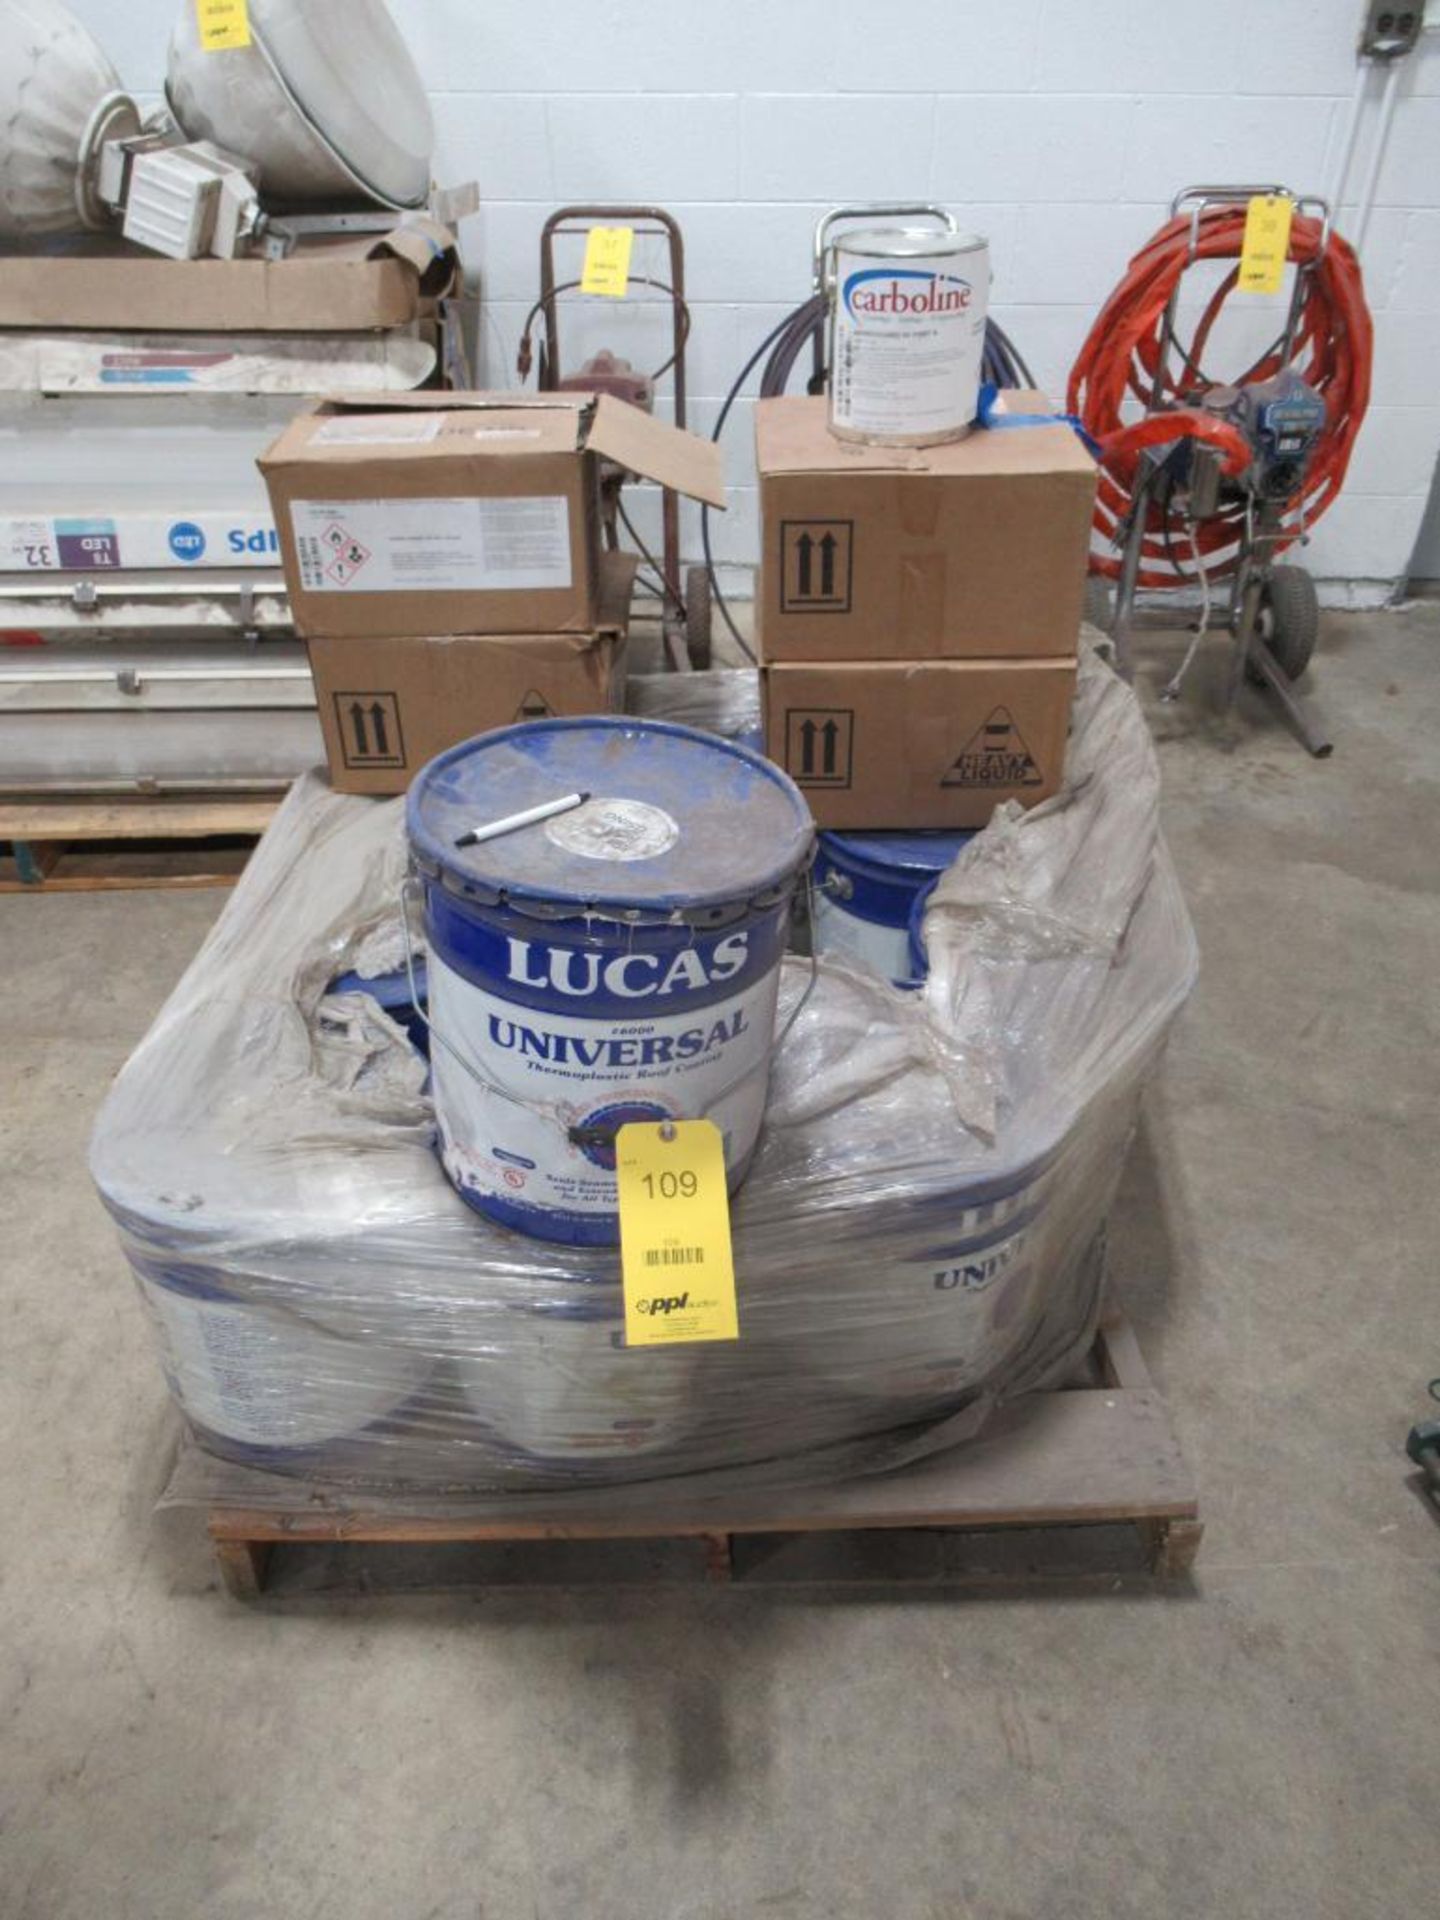 LOT: (10) 5-Gallon Lucas Roof Top Coating & Cases 1 Gallon Carboline Carboguard 60 Part A on Pallet